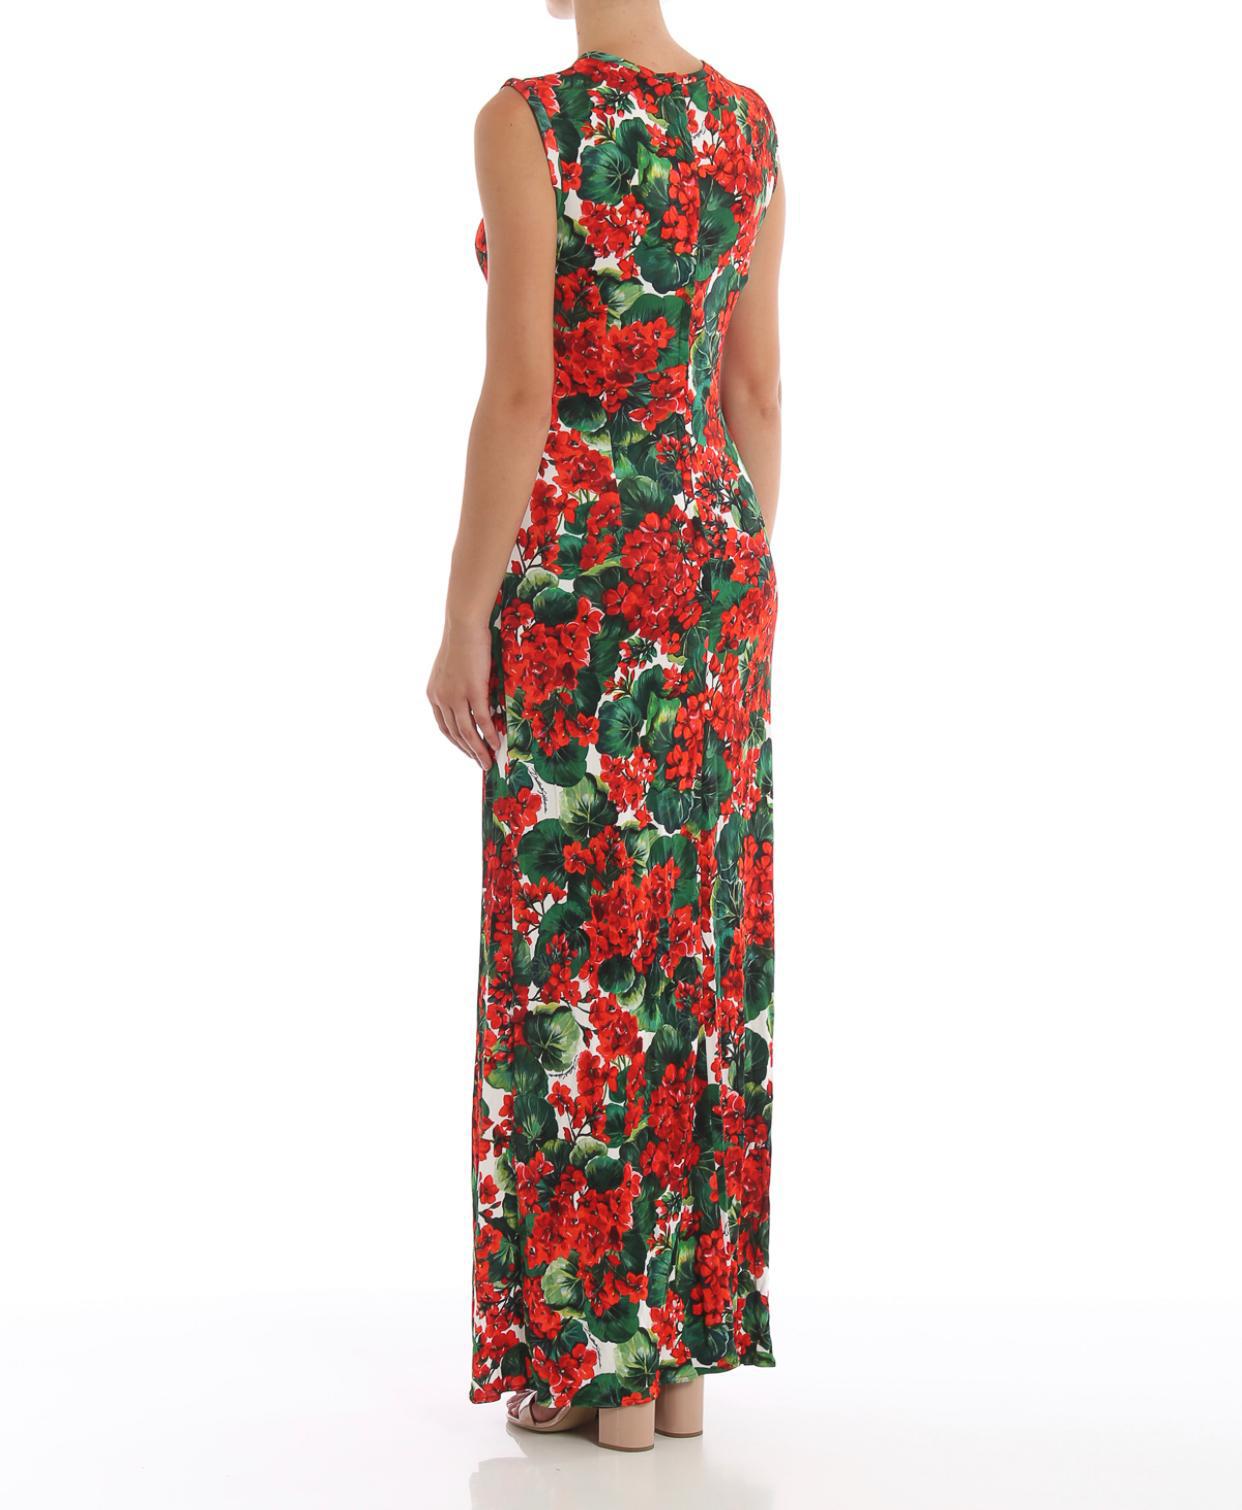 Dolce & Gabbana Red Geranium print jersey crewneck maxi dress featuring rear concealed zip and hook fastening.

Composition and details
100% Viscose
Color: Red
Gender: Women
Season: Fall Winter 2019

Size 42IT UK10, M. 

Brand new with original